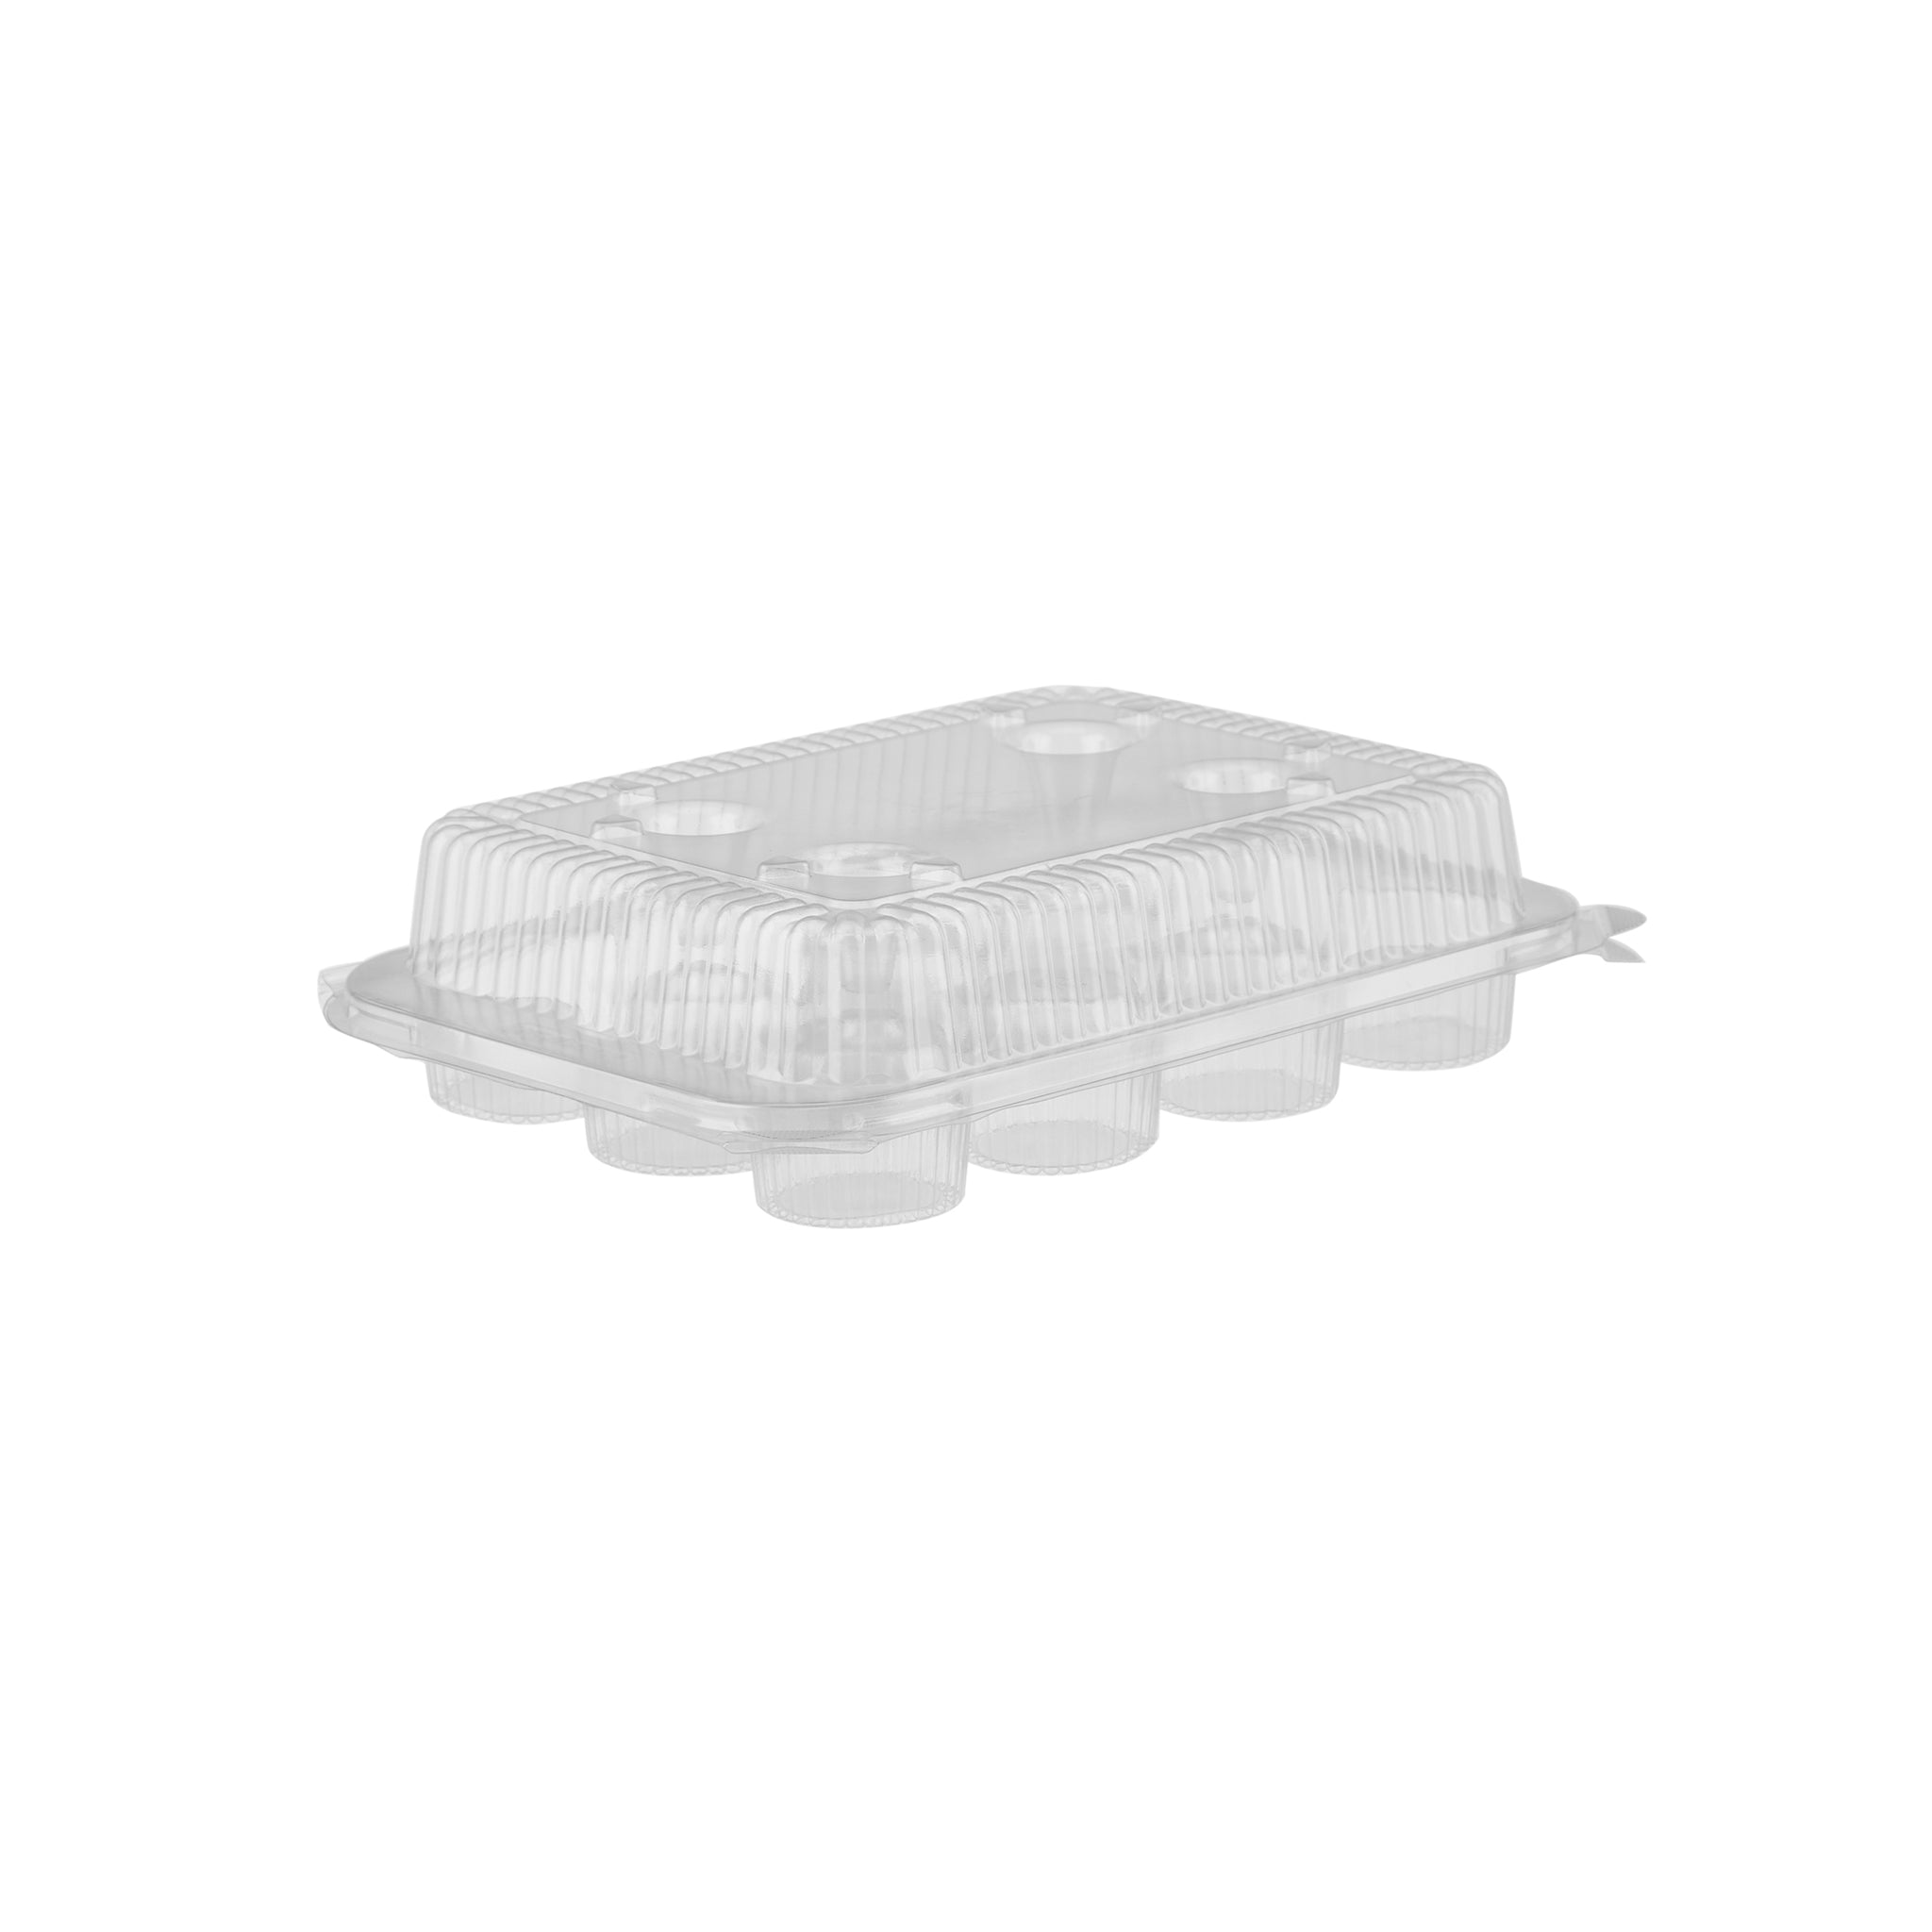 250 Pieces Clear PET Muffin/ Cupcake Tray